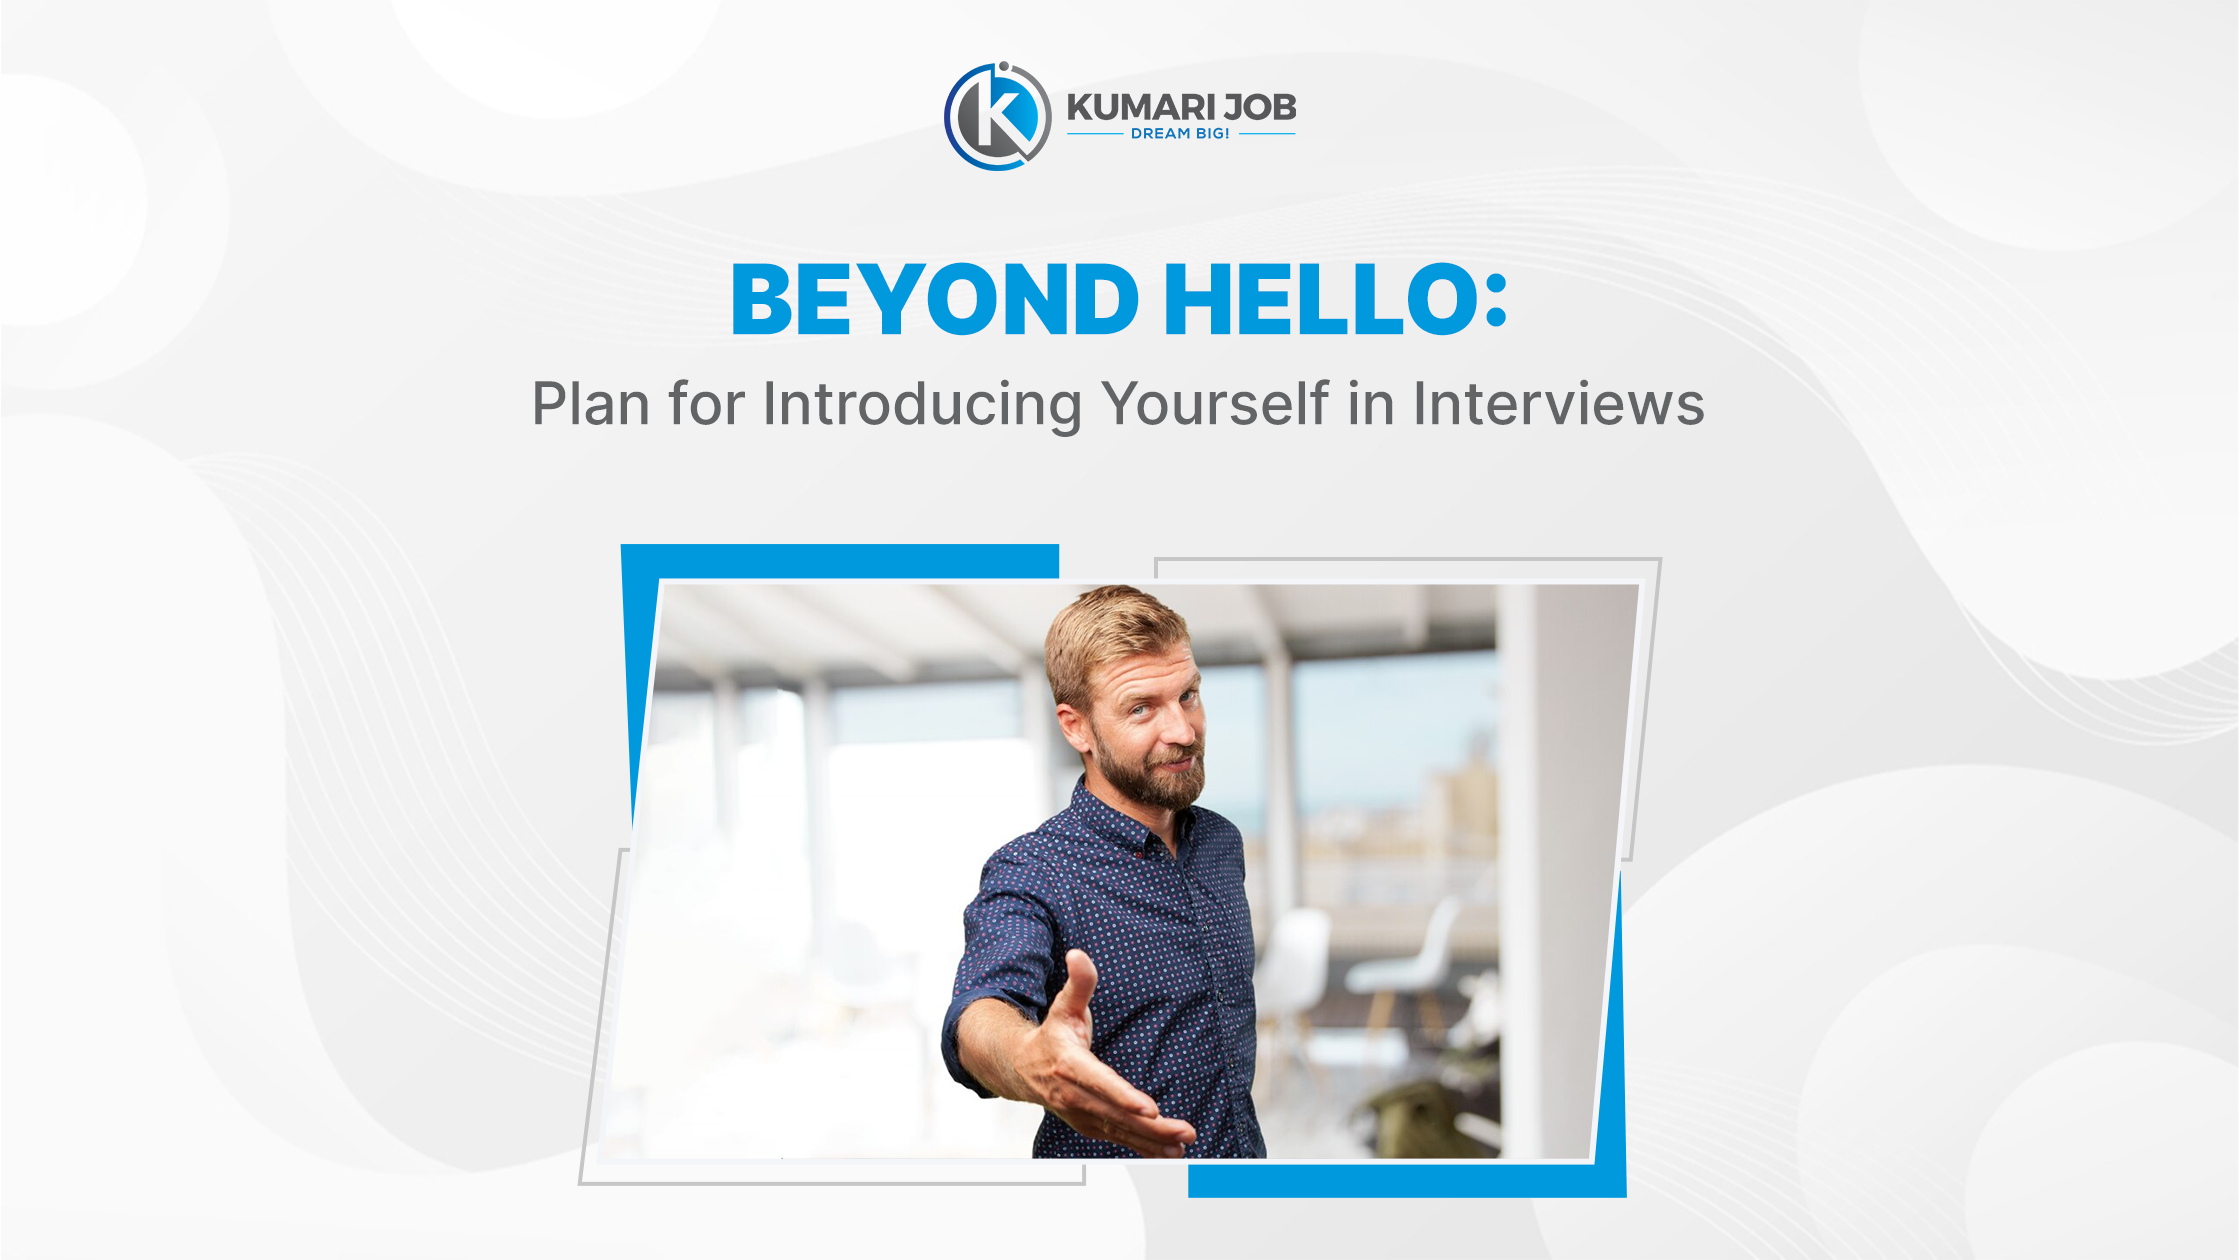 Presenting yourself in an interview